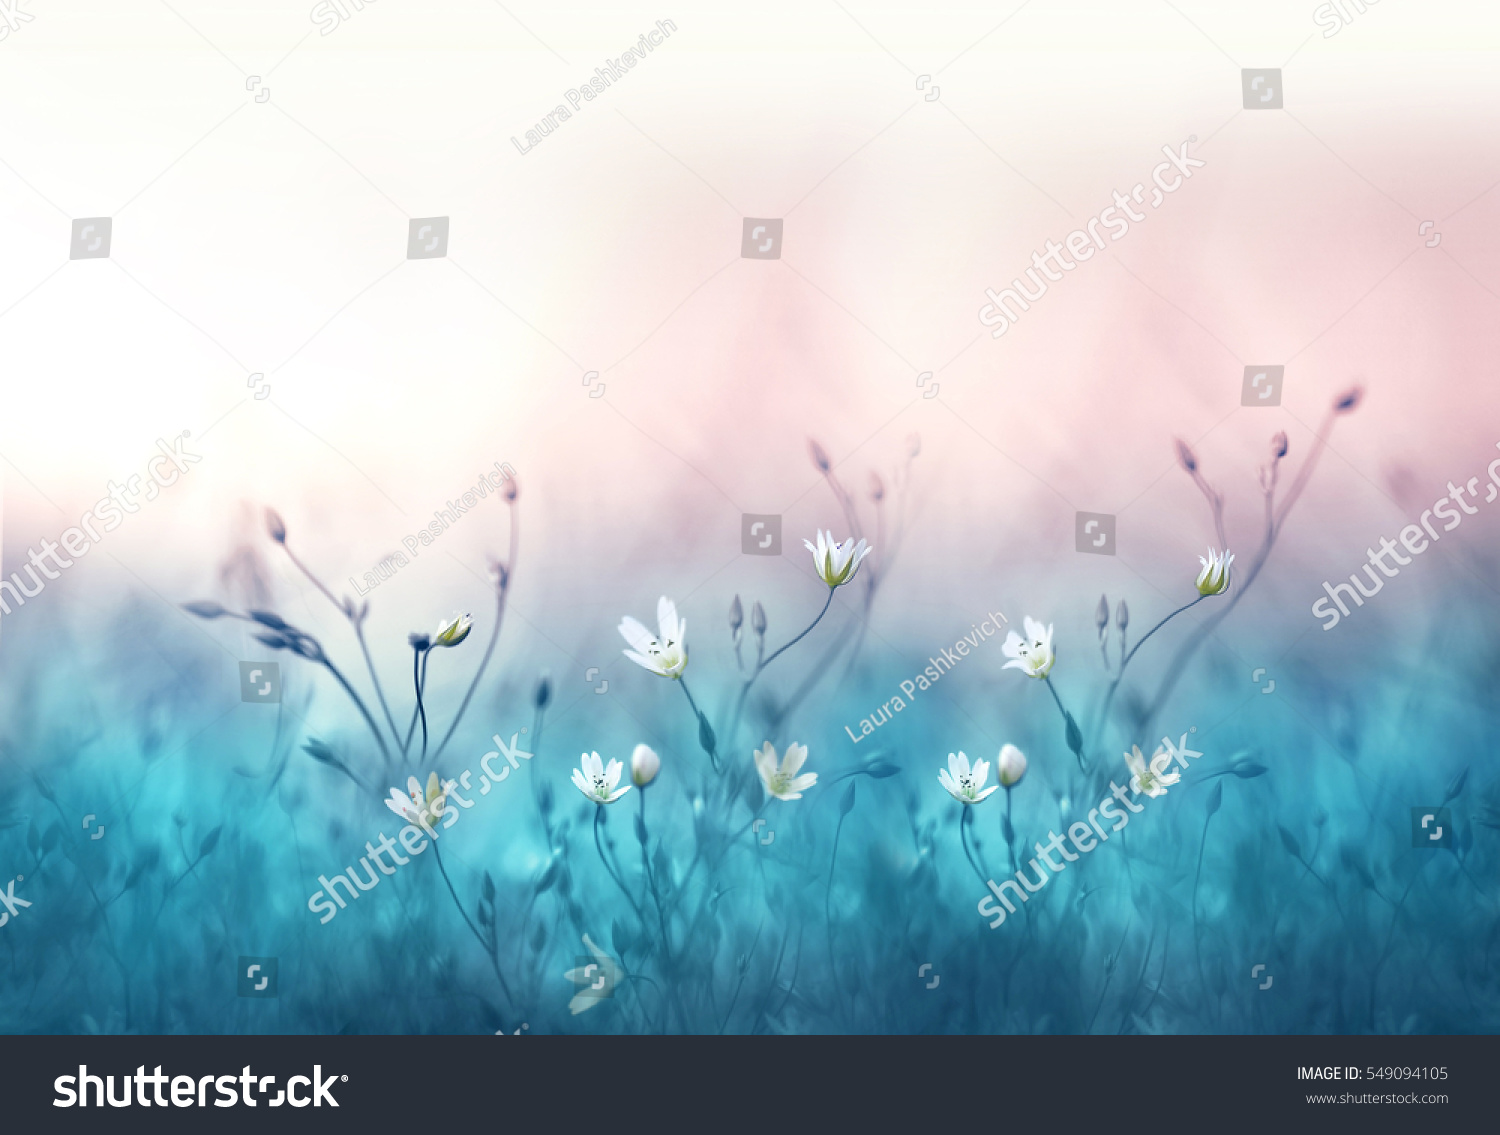 Small white flowers on a toned on gentle soft blue and pink background outdoors close-up macro . Spring summer border  template floral background. Light air delicate artistic image, free space. #549094105